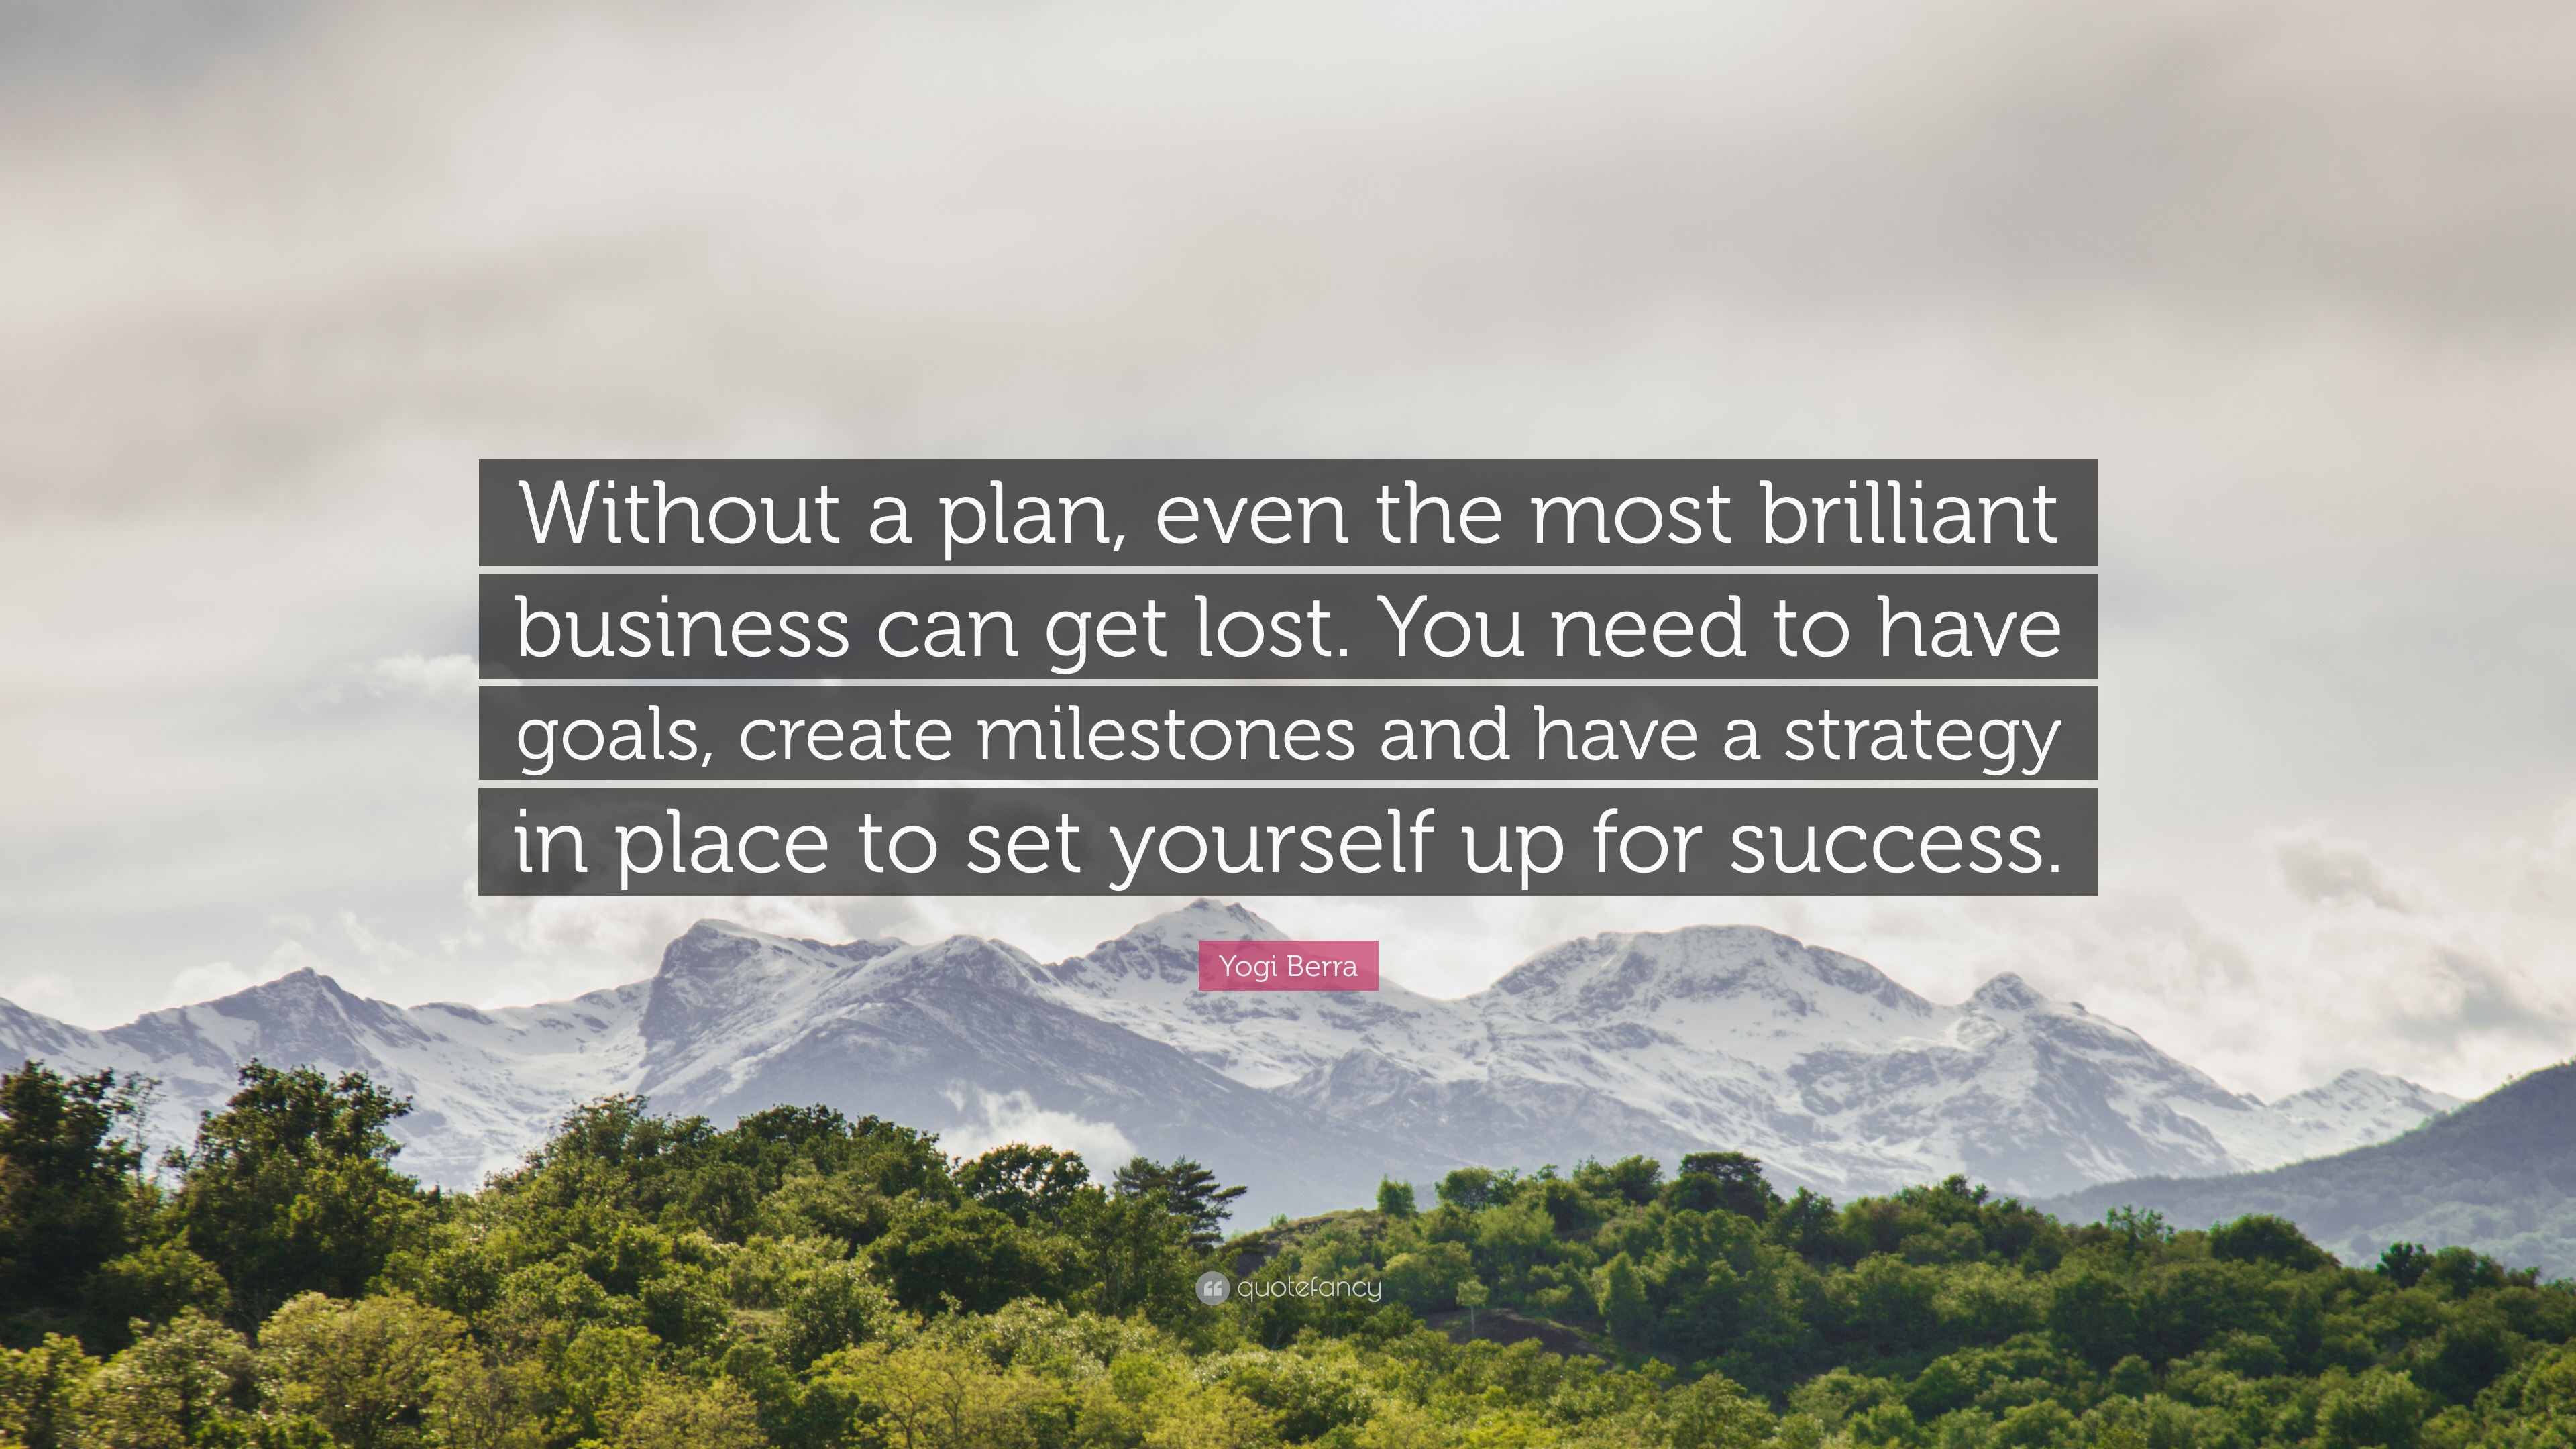 Yogi Berra Quote: “Without a plan, even the most brilliant business can get  lost. You need to have goals, create milestones and have a stra”